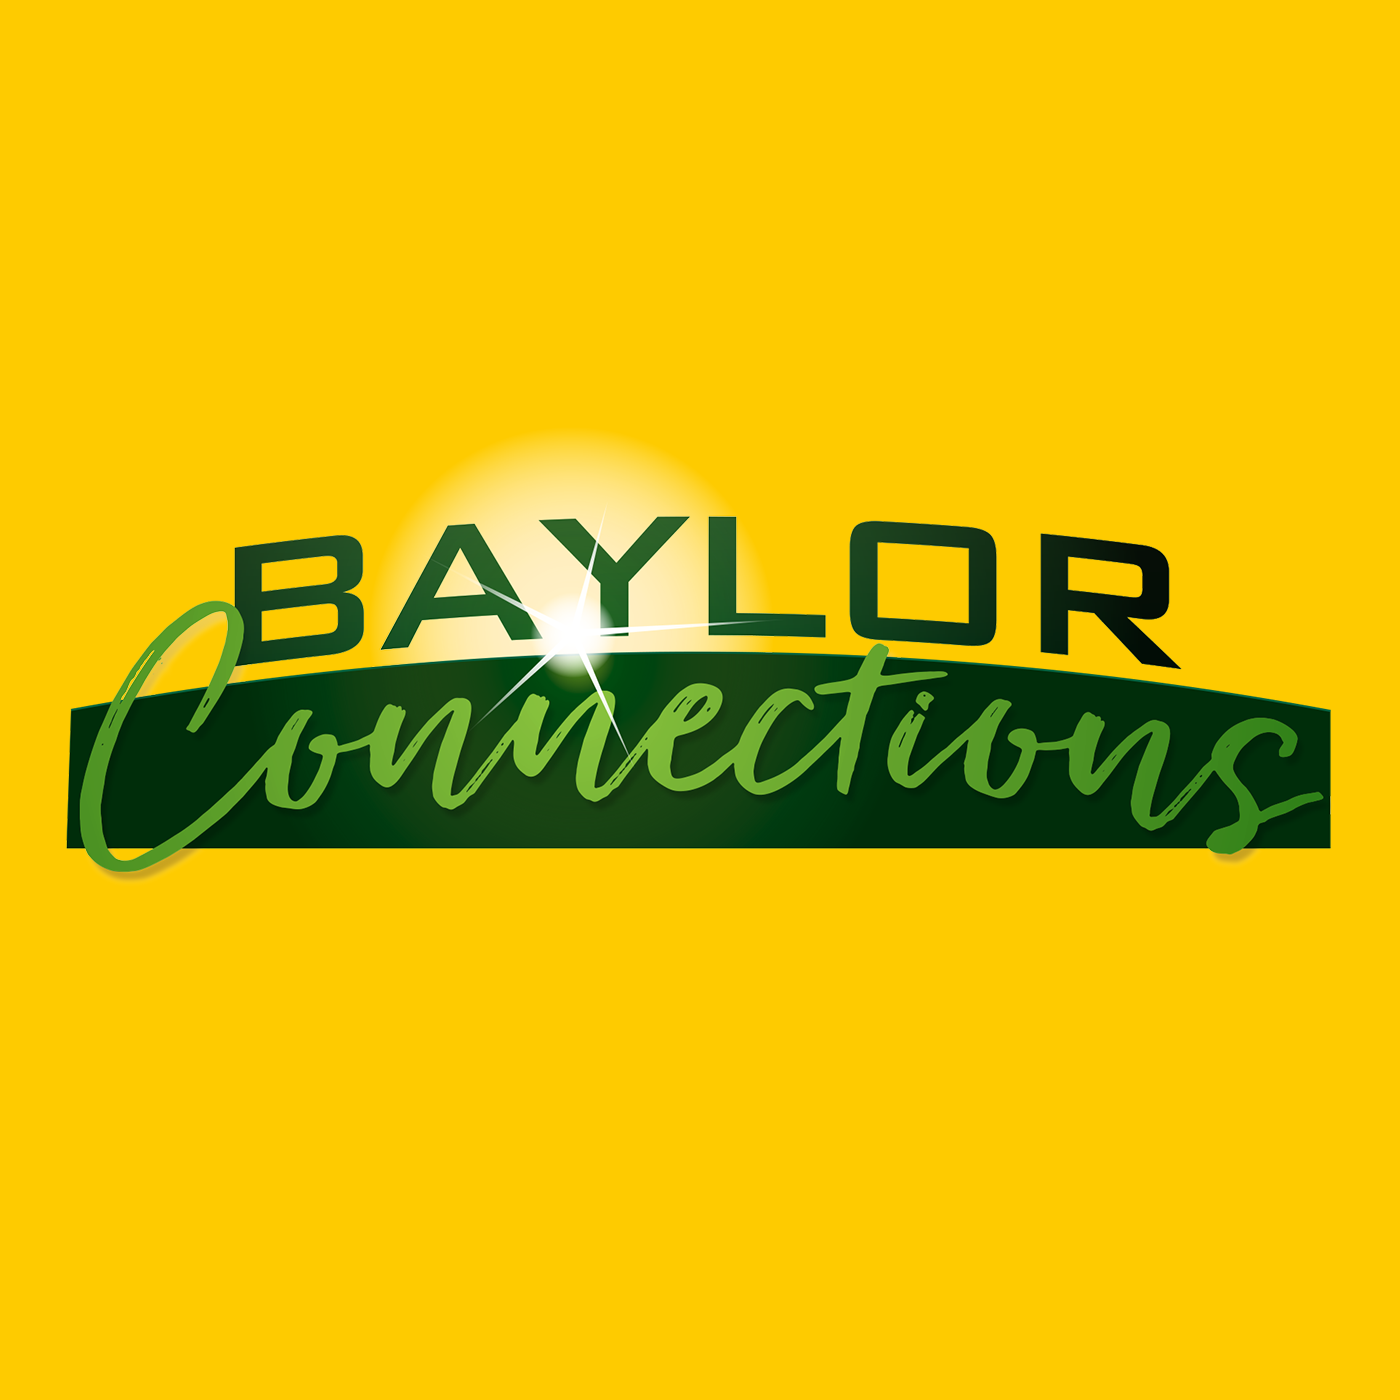 Baylor Connections